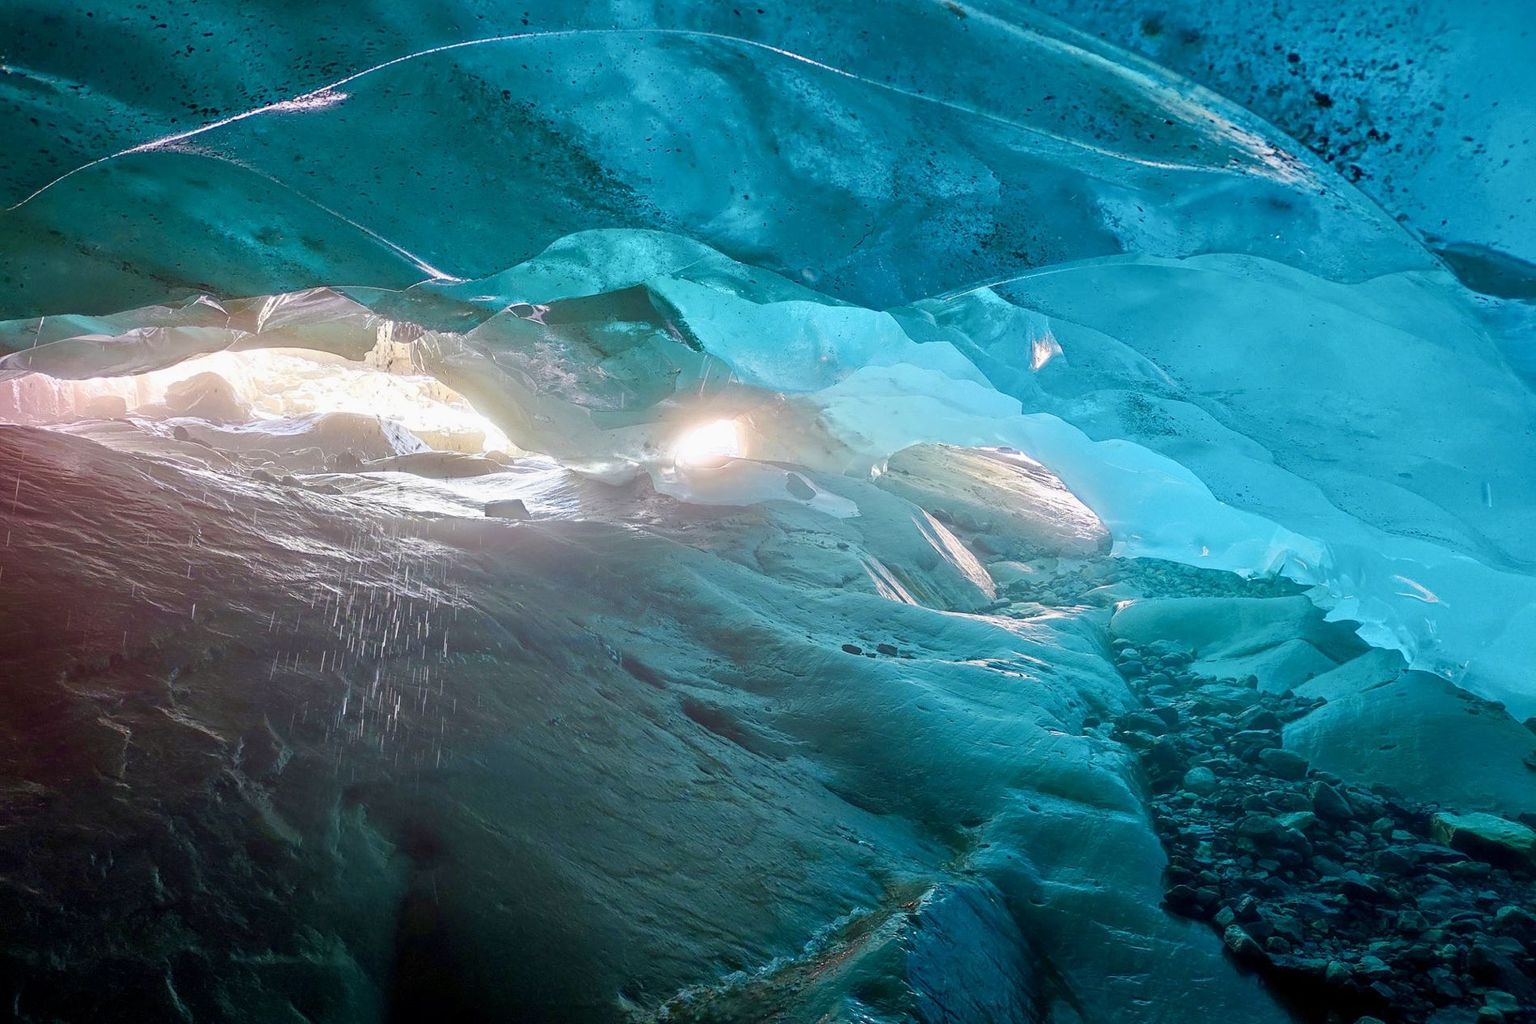 Melt water and air flows create impressive cavities below the glacial ice.